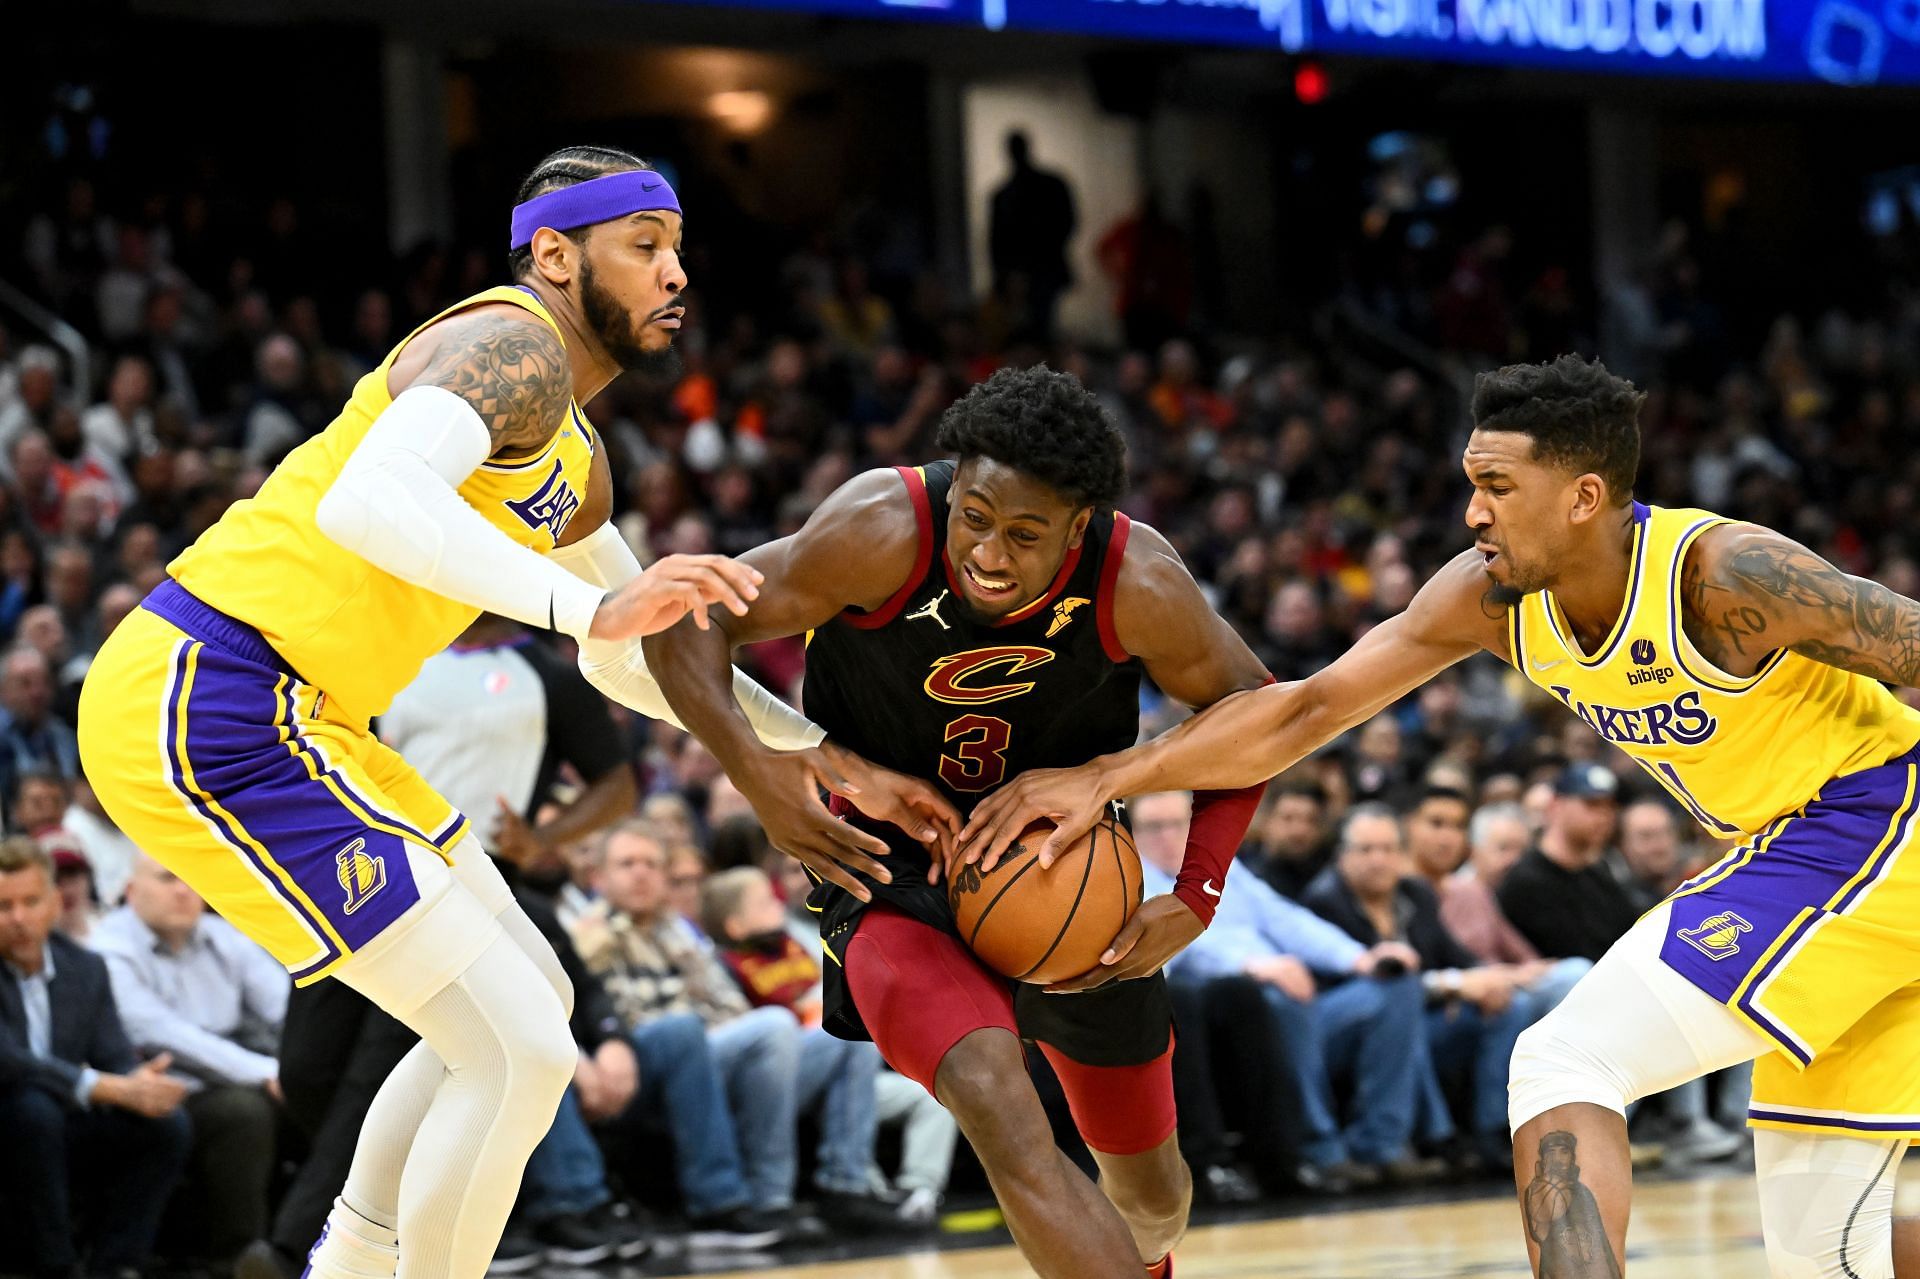 Carmelo Anthony (left) and Malik Monk (right) of the LA Lakers try to dispossess Caris LeVert of the Cleveland Cavaliers